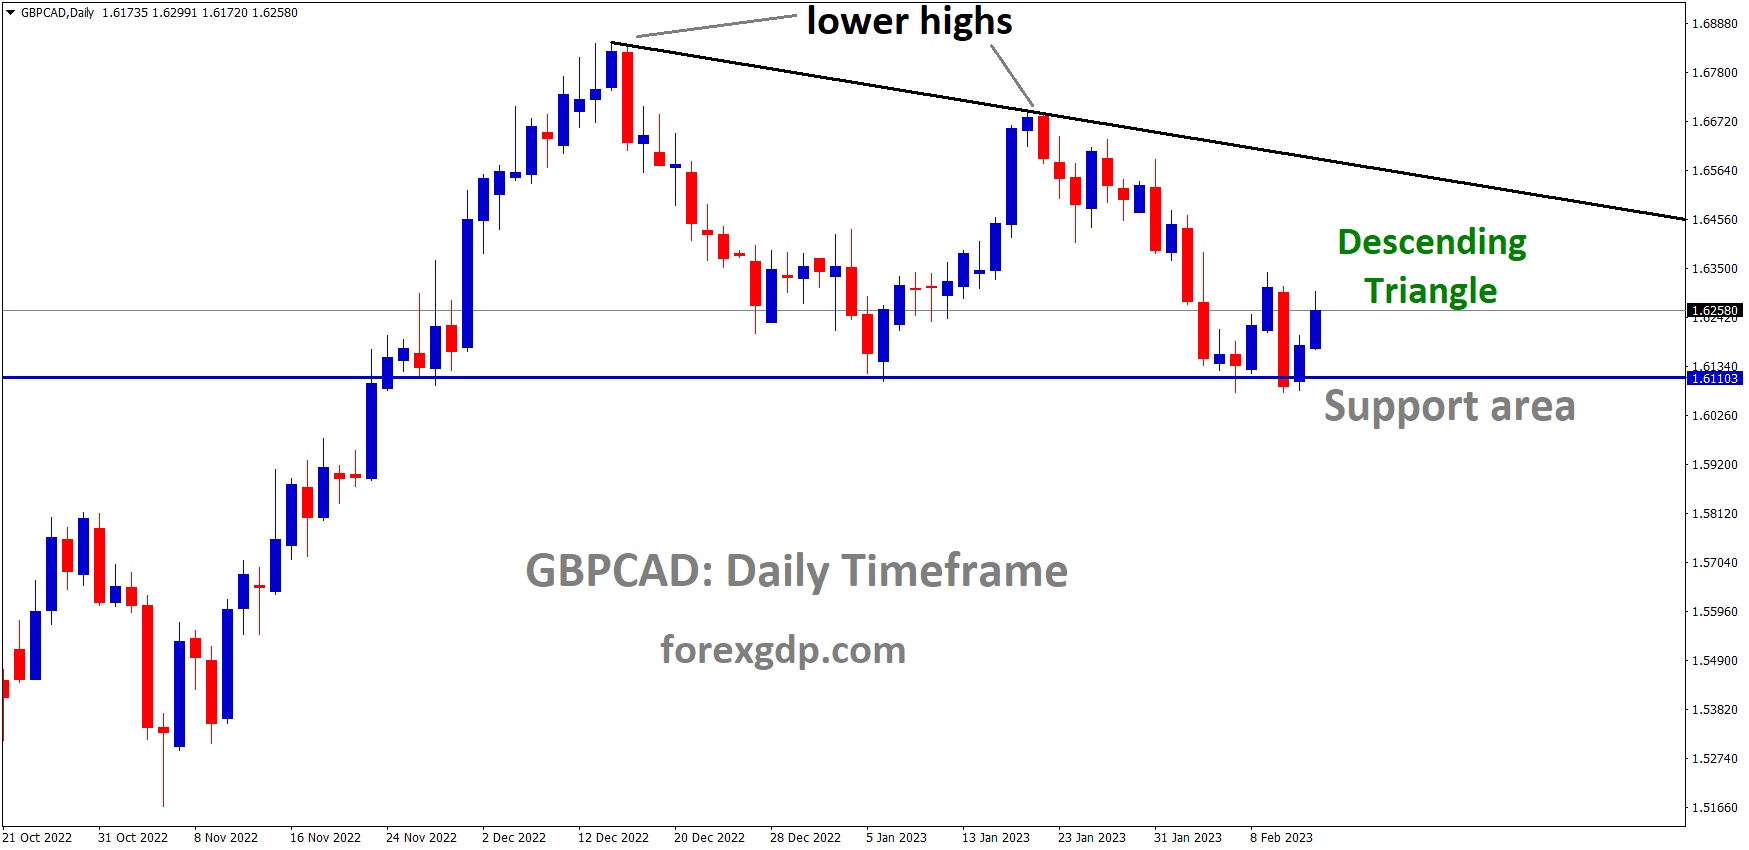 GBPCAD is moving in the Descending triangle pattern and the market has rebounded